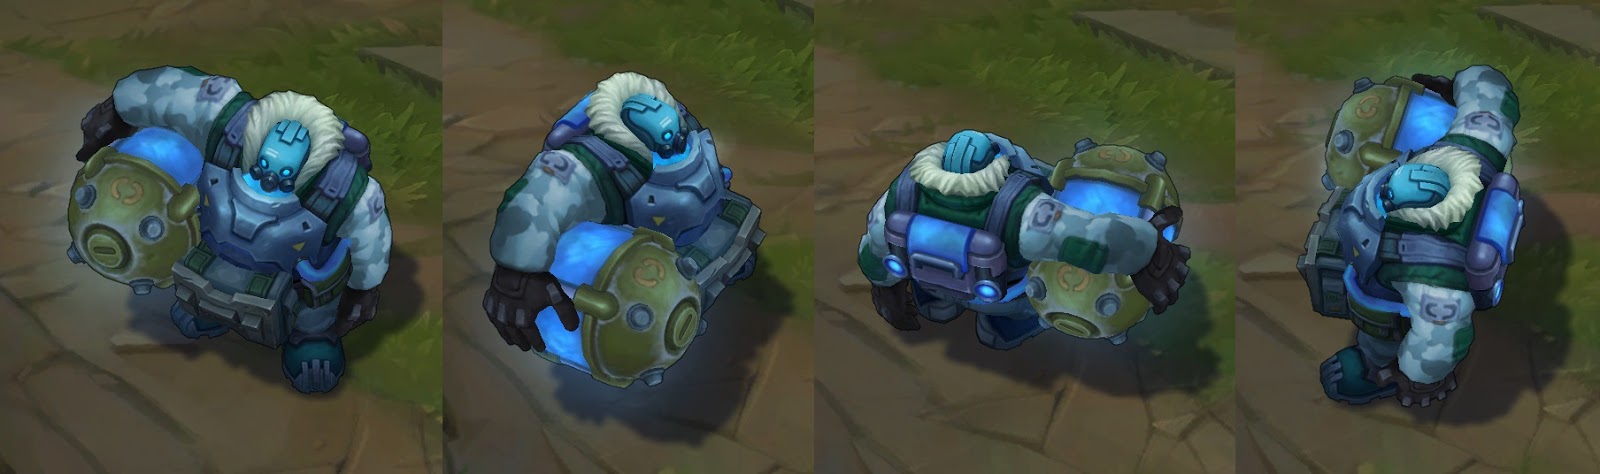 arctic ops gragas skin for league of legends ingame picture